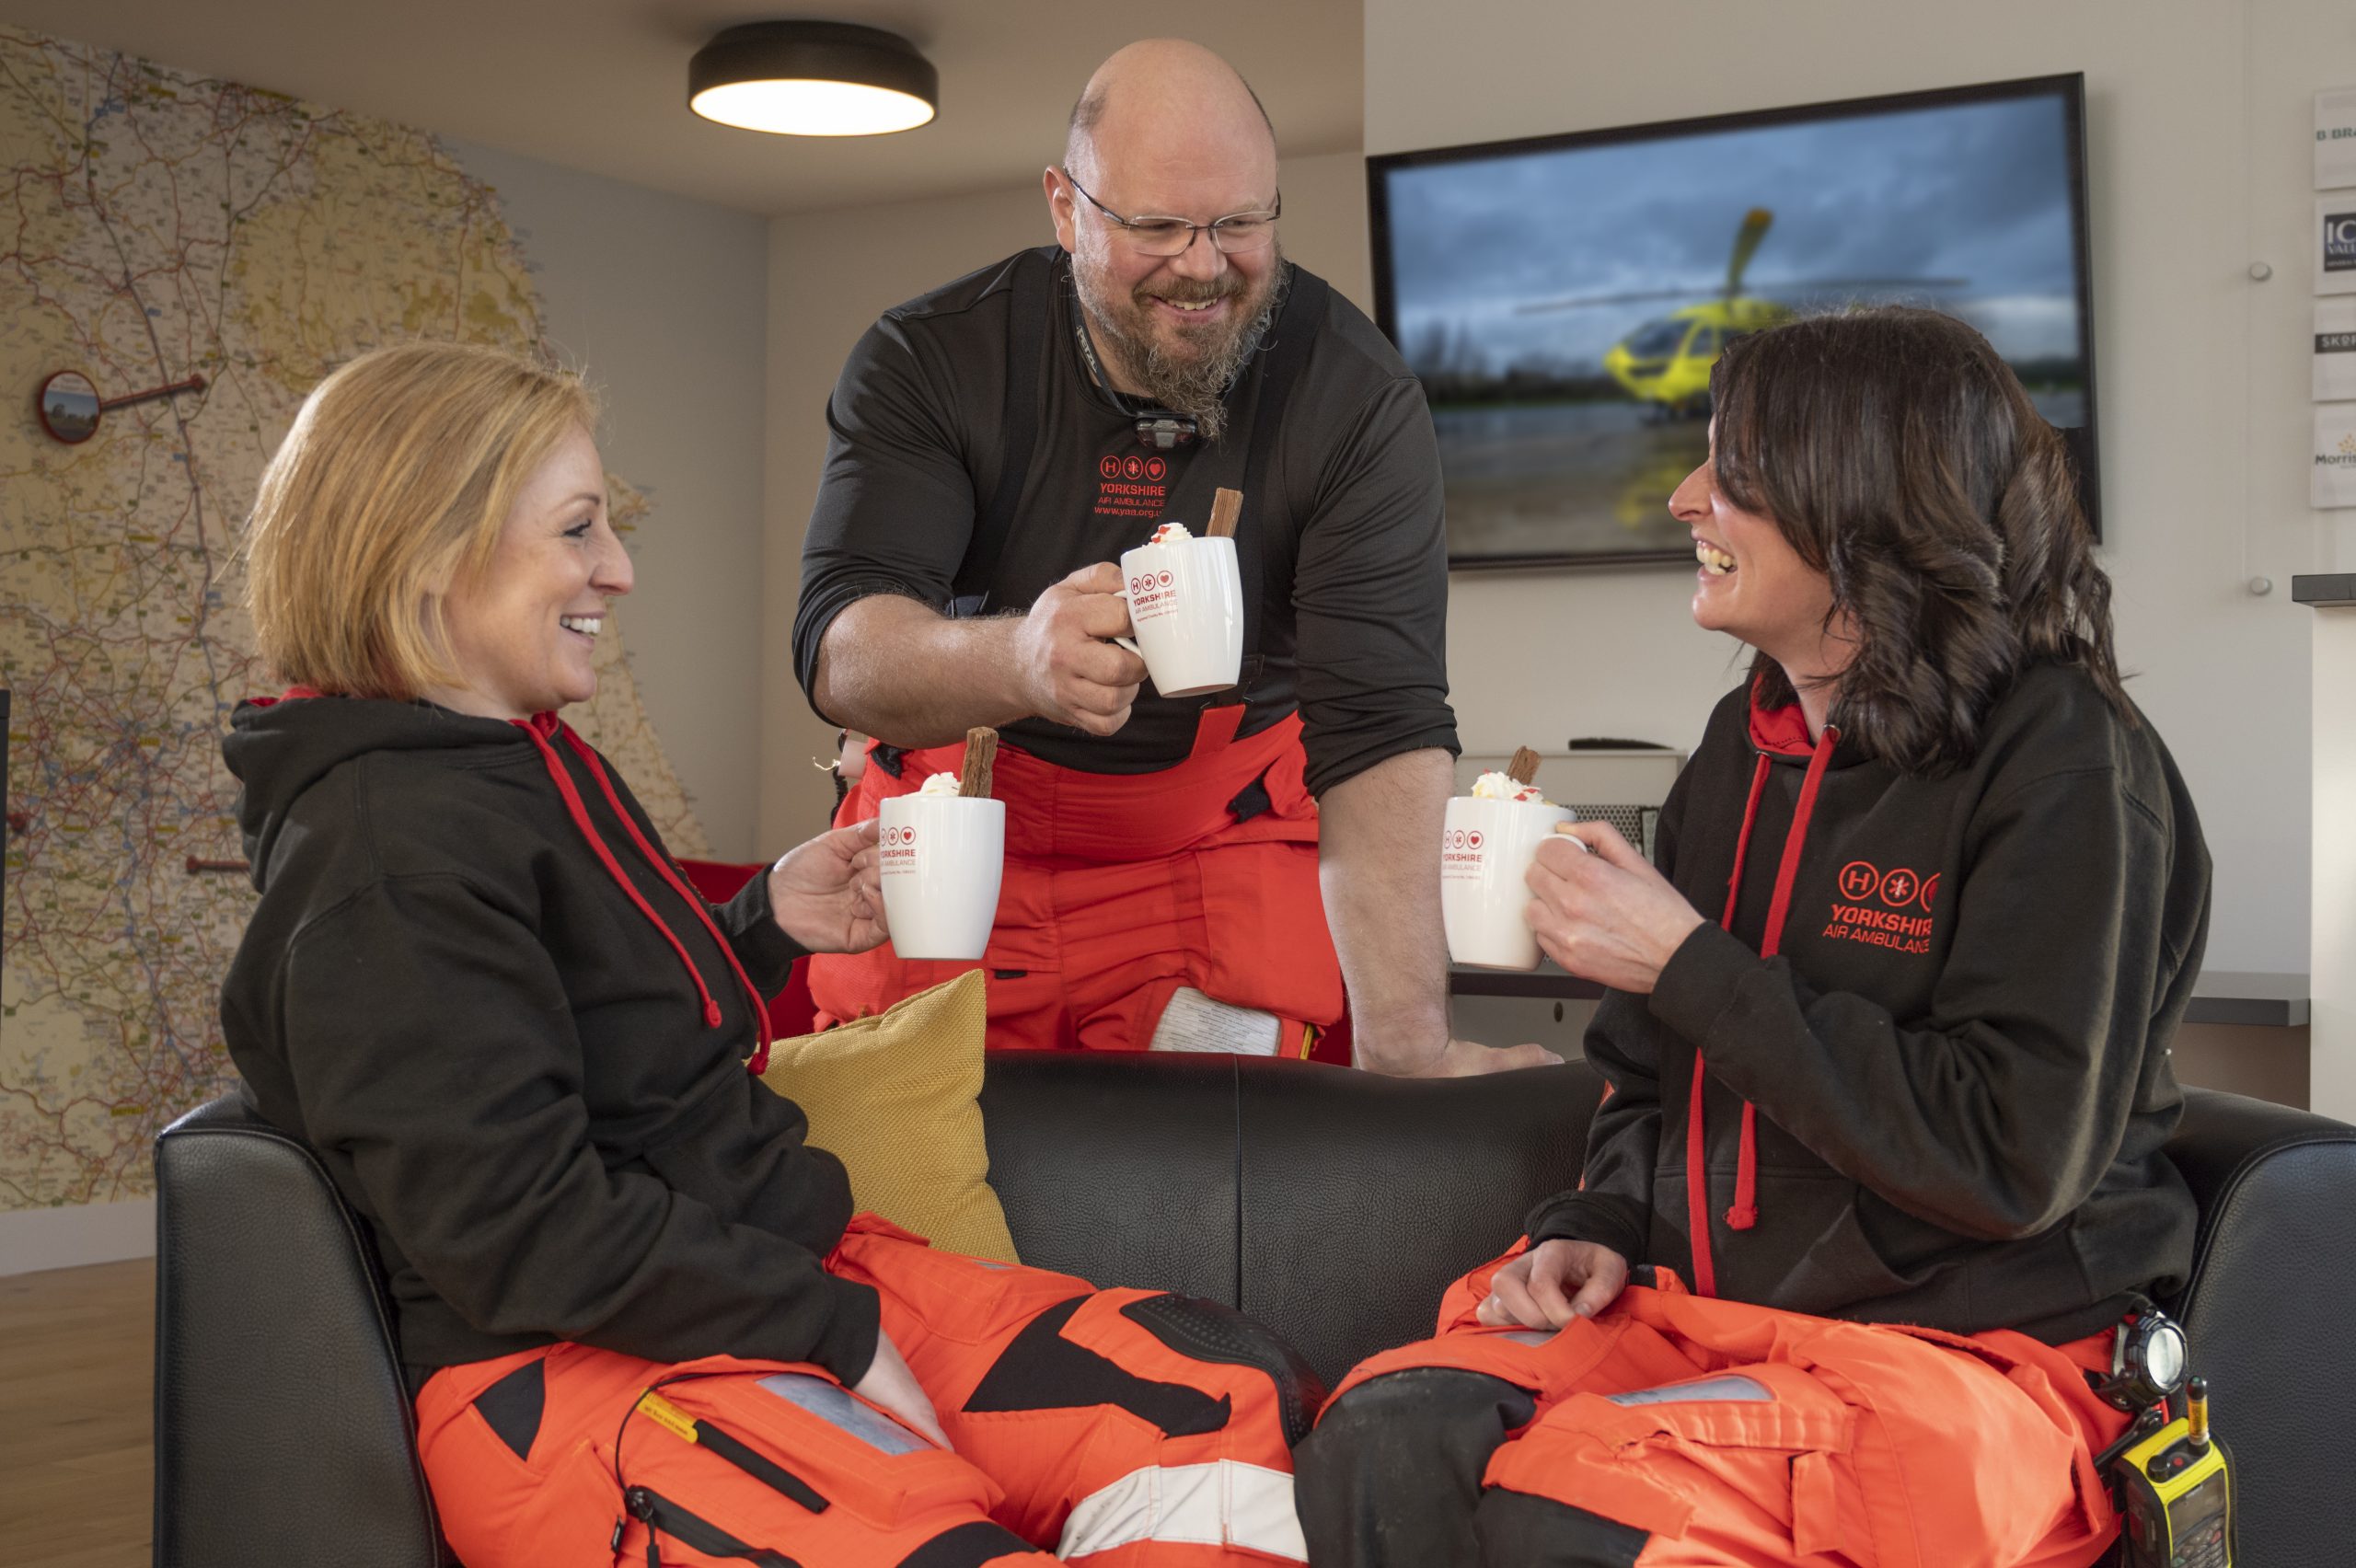 Two members of the Yorkshire Air Ambulance crew are sat on a black couch and one member of the crew is stood behind the couch. They are all holding a cup of hot chocolate and they are all laughing. In the background there is a screen on the wall displaying a picture of the yellow Yorkshire Air Ambulance helicopter.